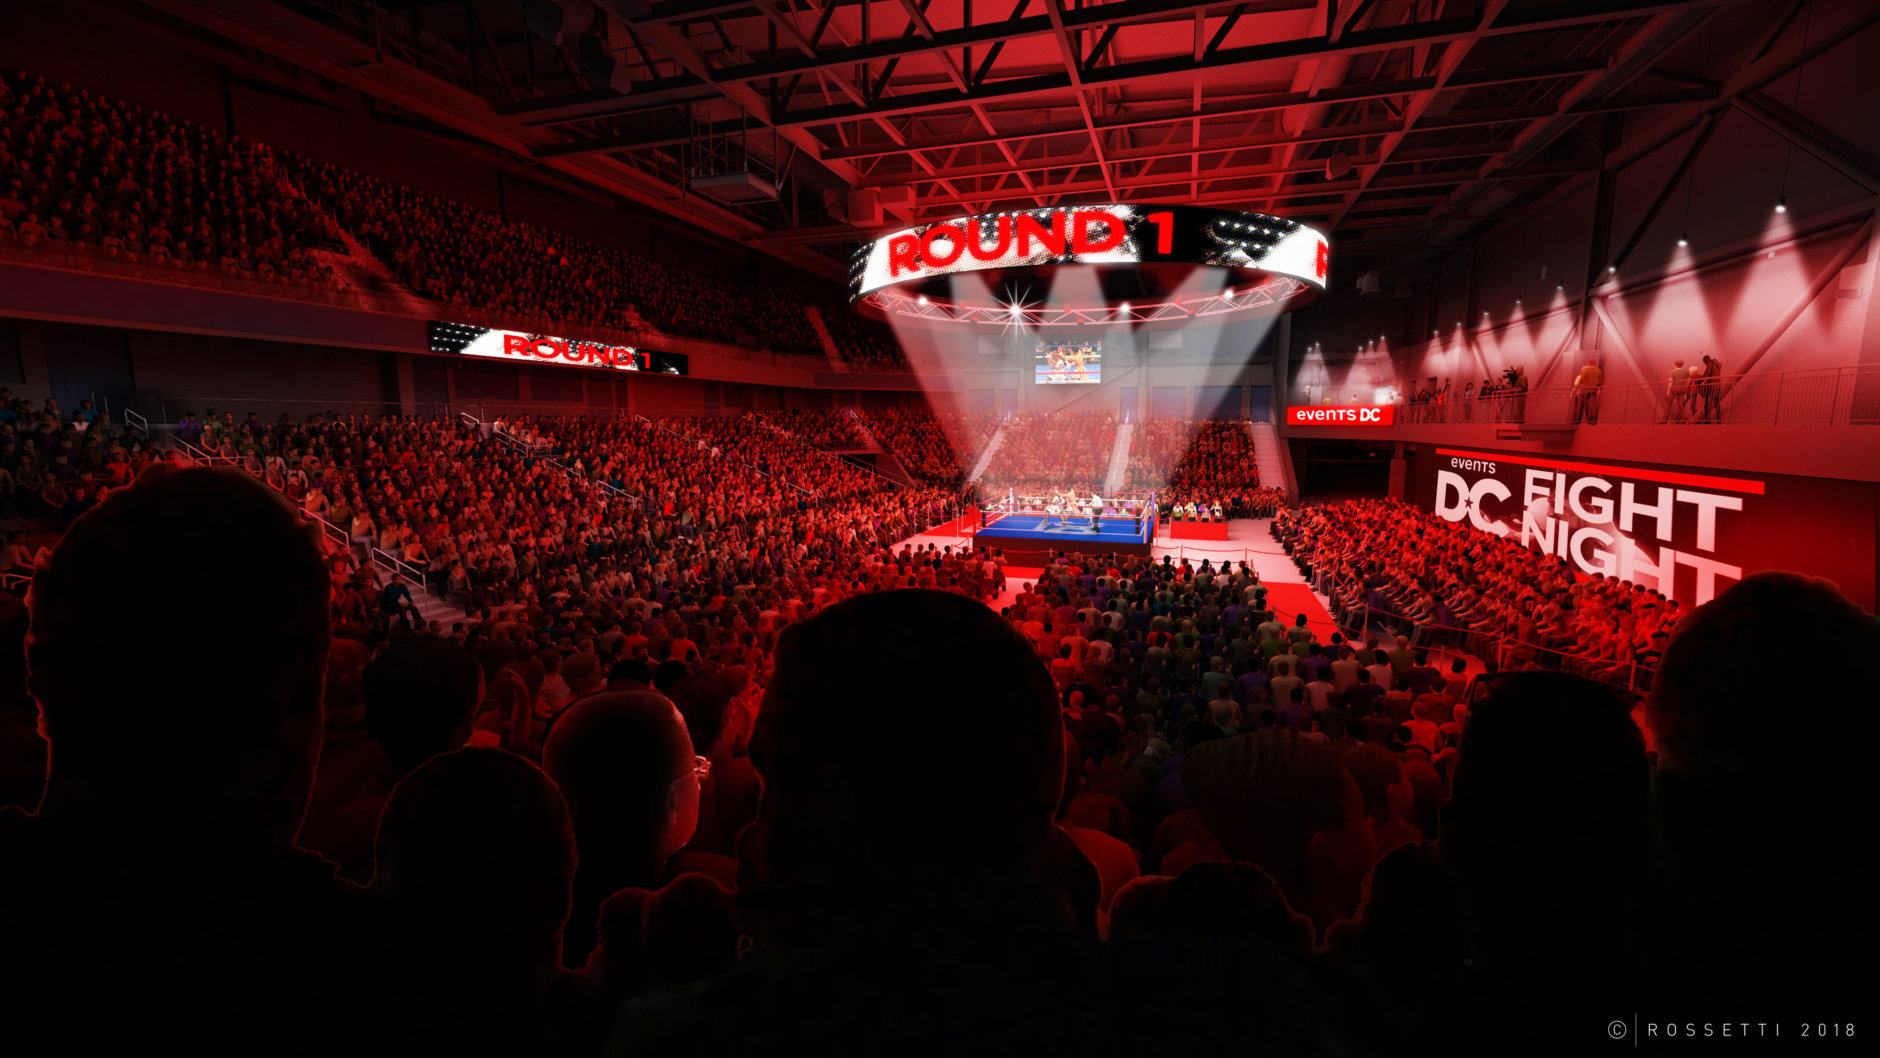 The arena is considered a major economic win for D.C.'s Ward 8. (Courtesy of Events DC)